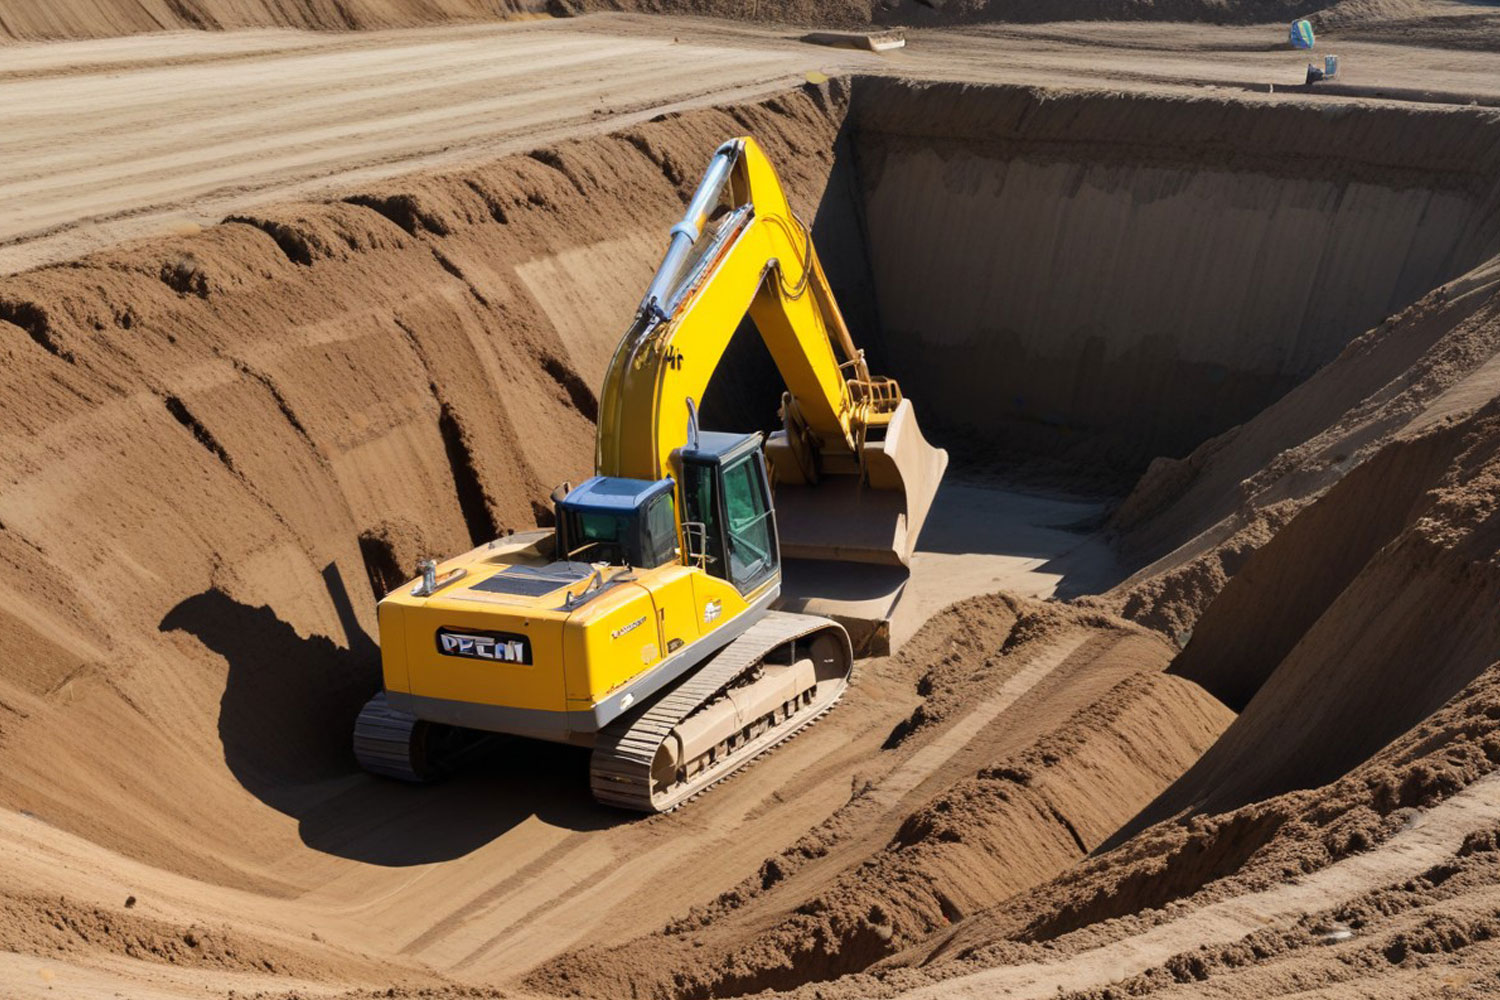 Types of Excavation: Trenching, Grading, Earthwork, and More